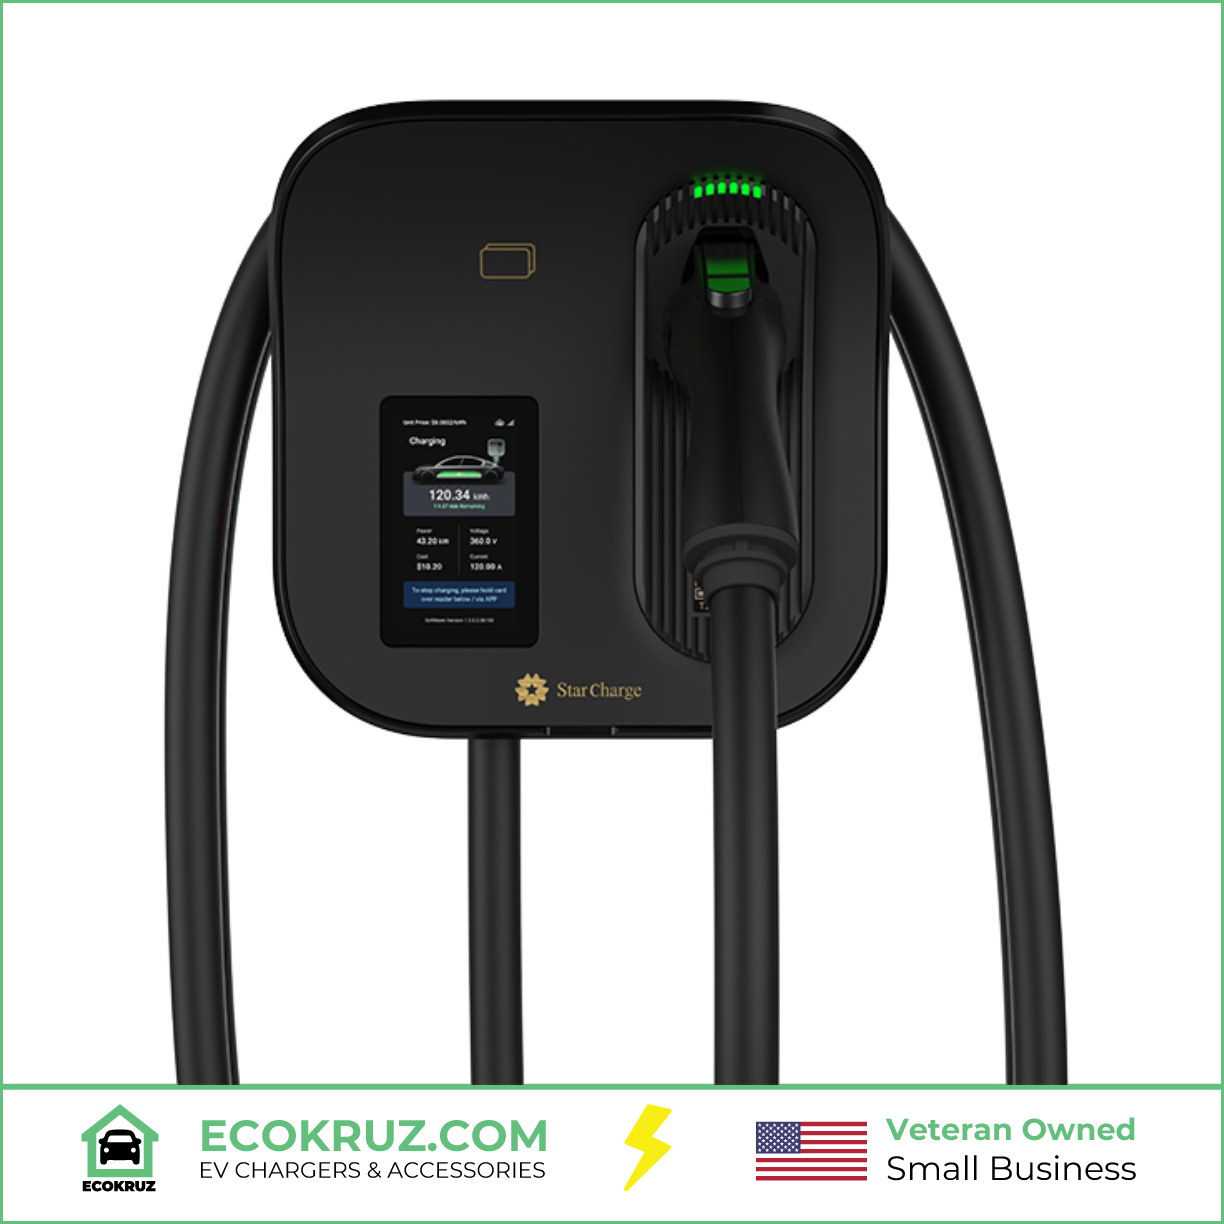 6.6kw 32A or 11.5kw 48A 240V AC Level 2 StarCharge Artemis Commercial EV Charger Wall Mount with Touch Screen